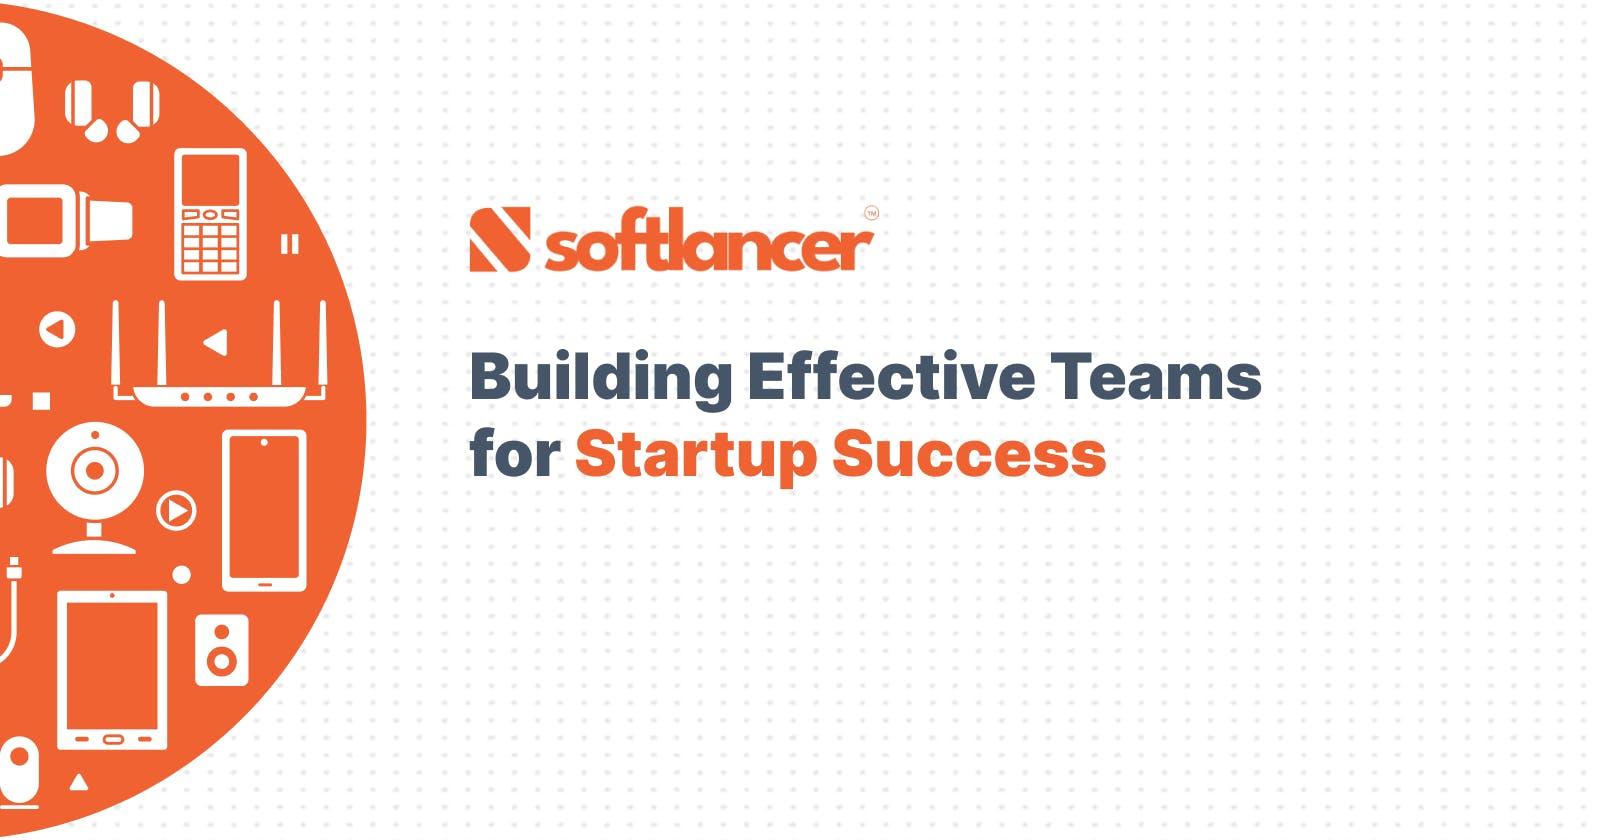 Building Effective Teams for Startup Success